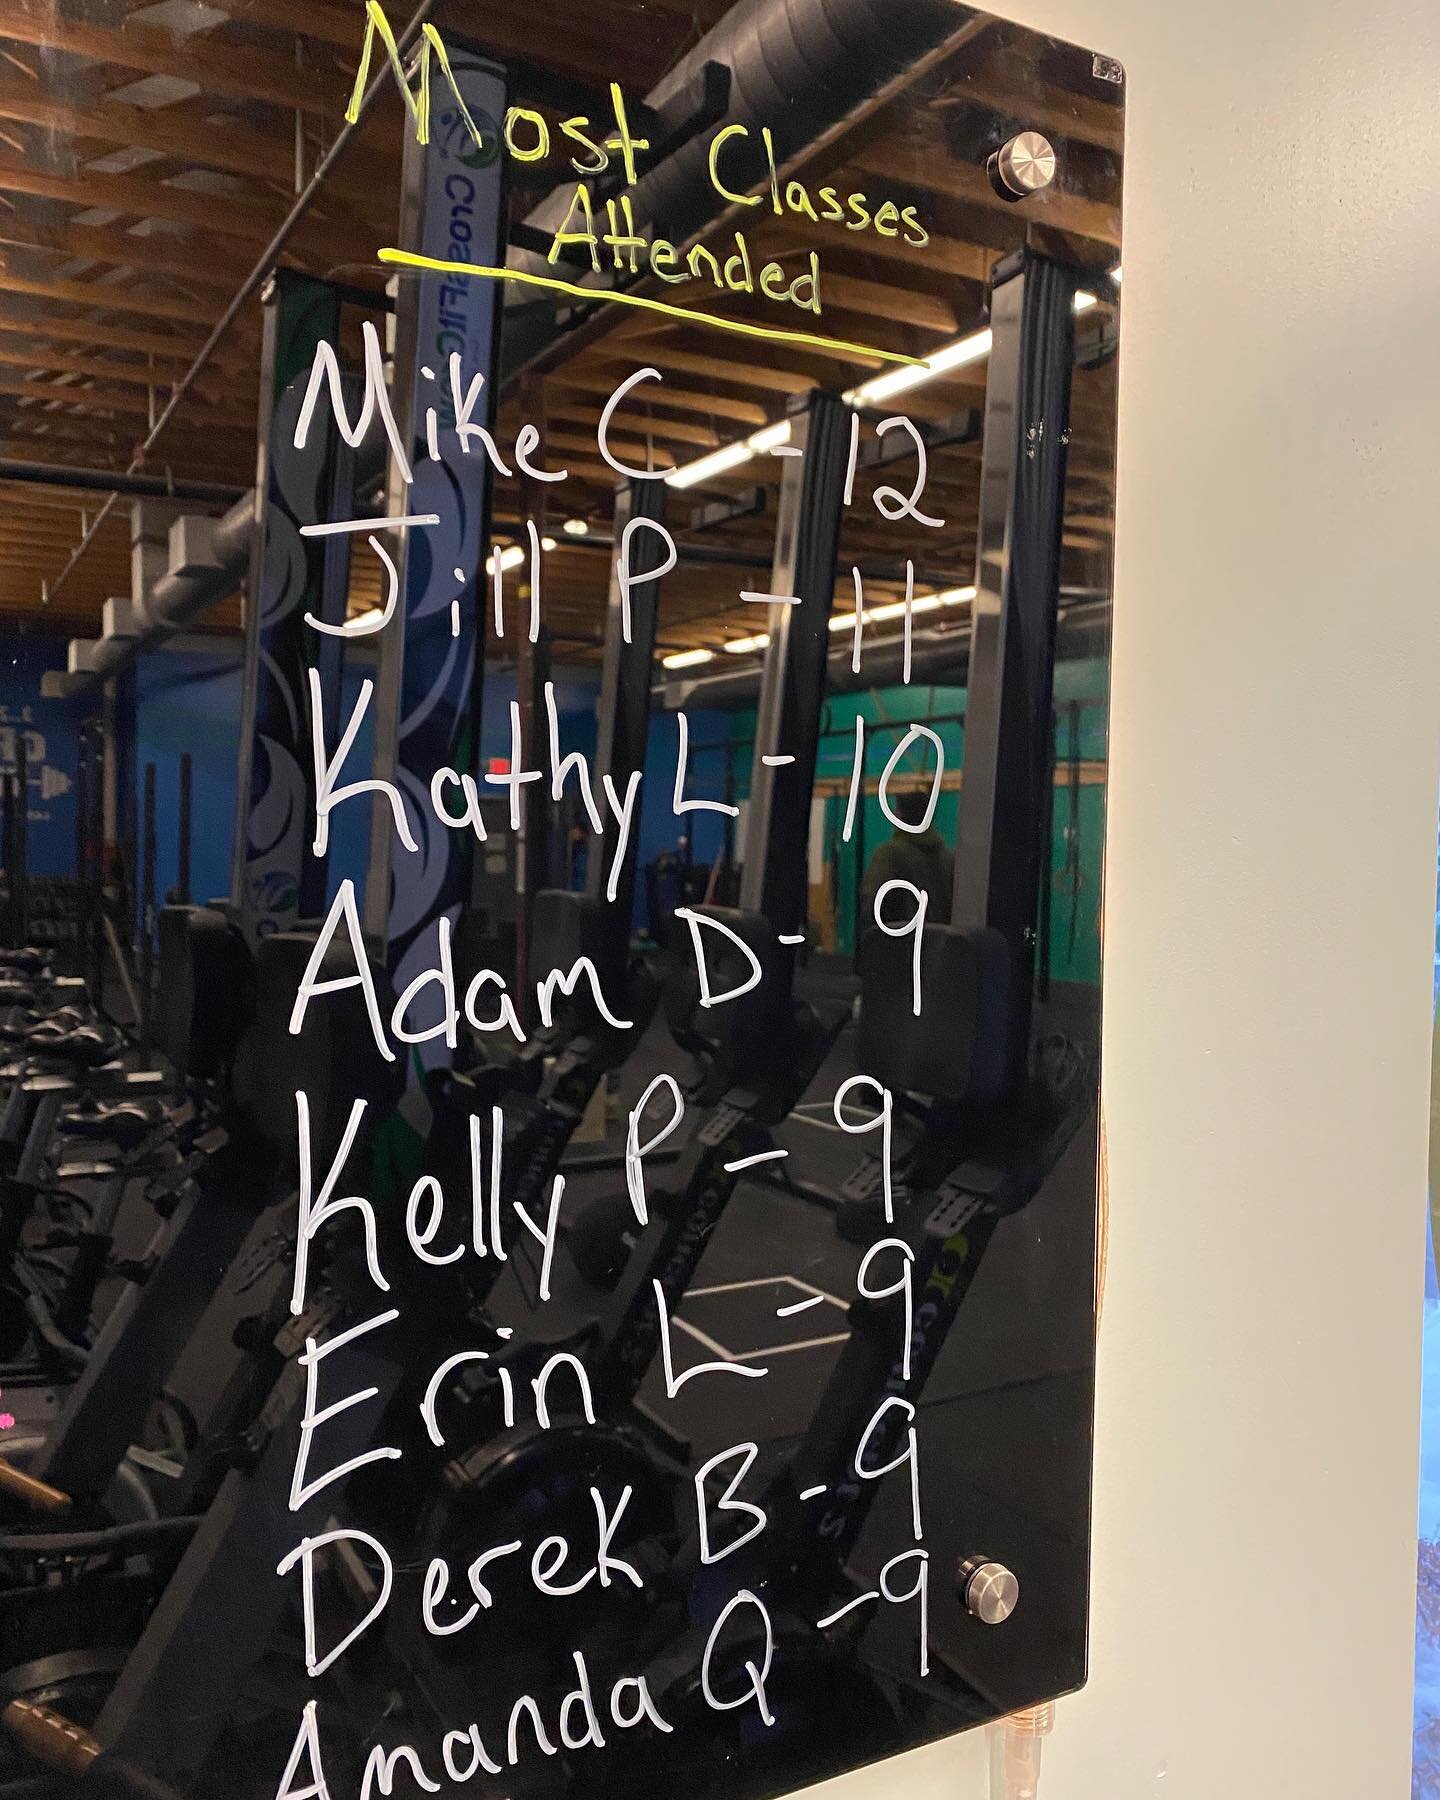 👏👏👏👏👏👏👏👏
Here are the totals as of yesterday morning! The chase is on! Whoever has the most attended classes in the month of January will receive a 6 pack of @fitaid 
Updated totals through today:
1. Jill p - 13
2. Mike C - 12
3. Erin L - 11
